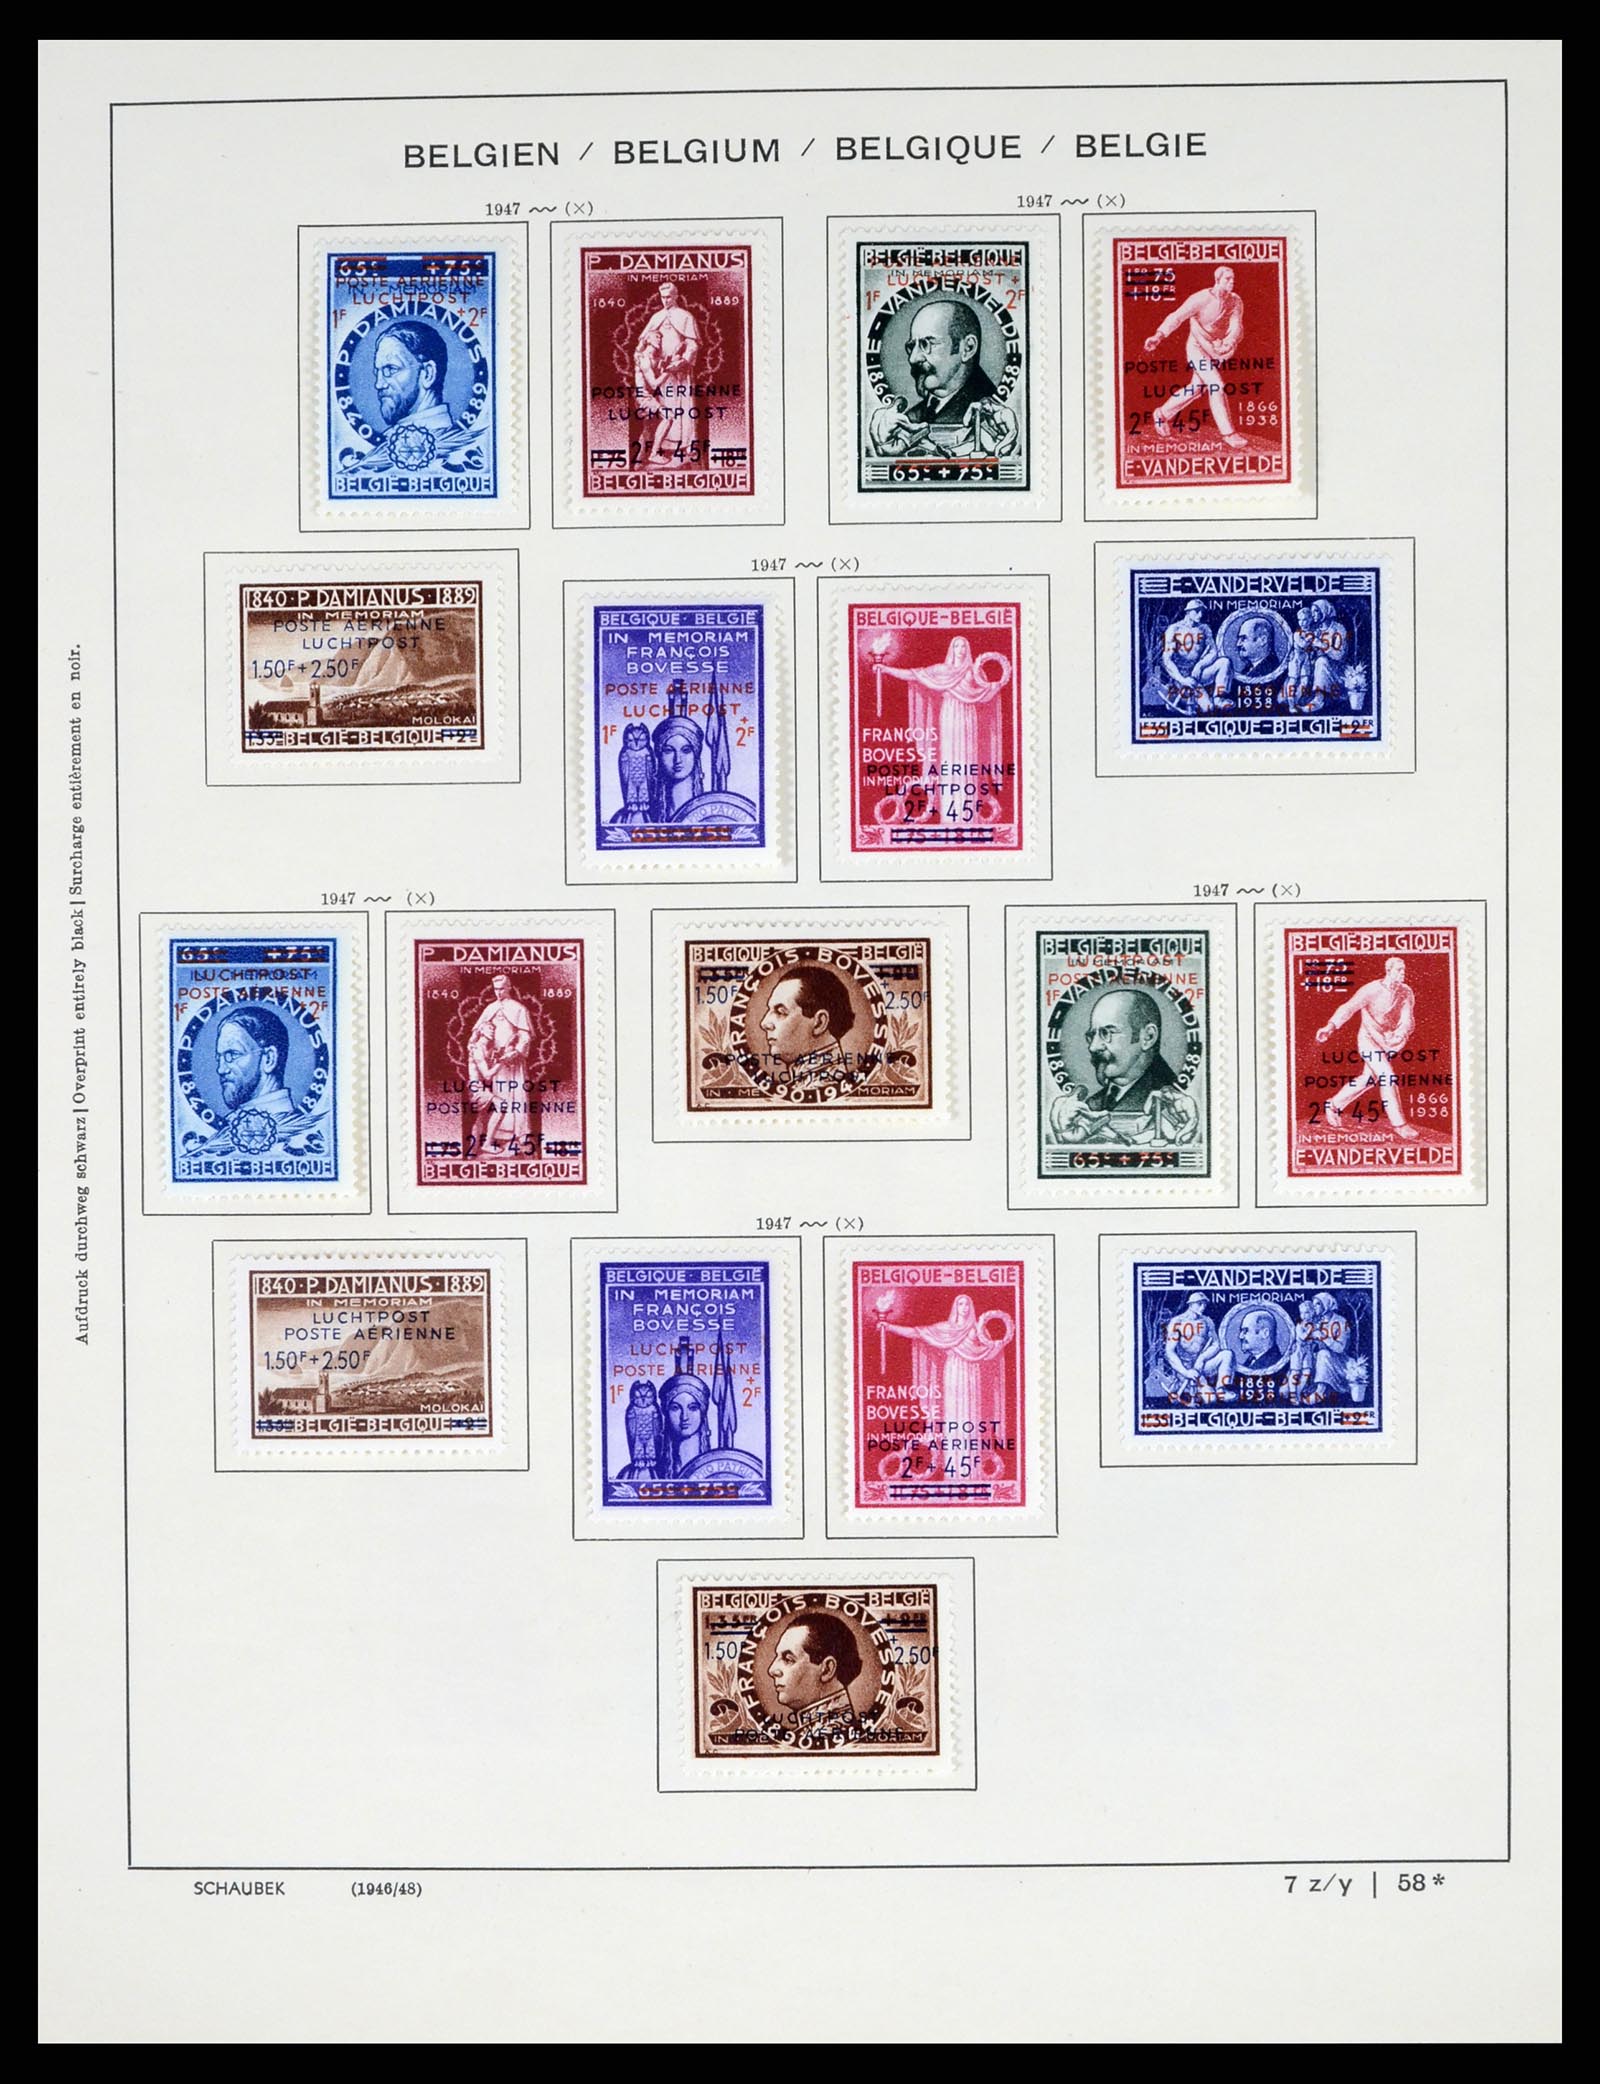 37595 066 - Stamp collection 37595 Super collection Belgium 1849-2015!